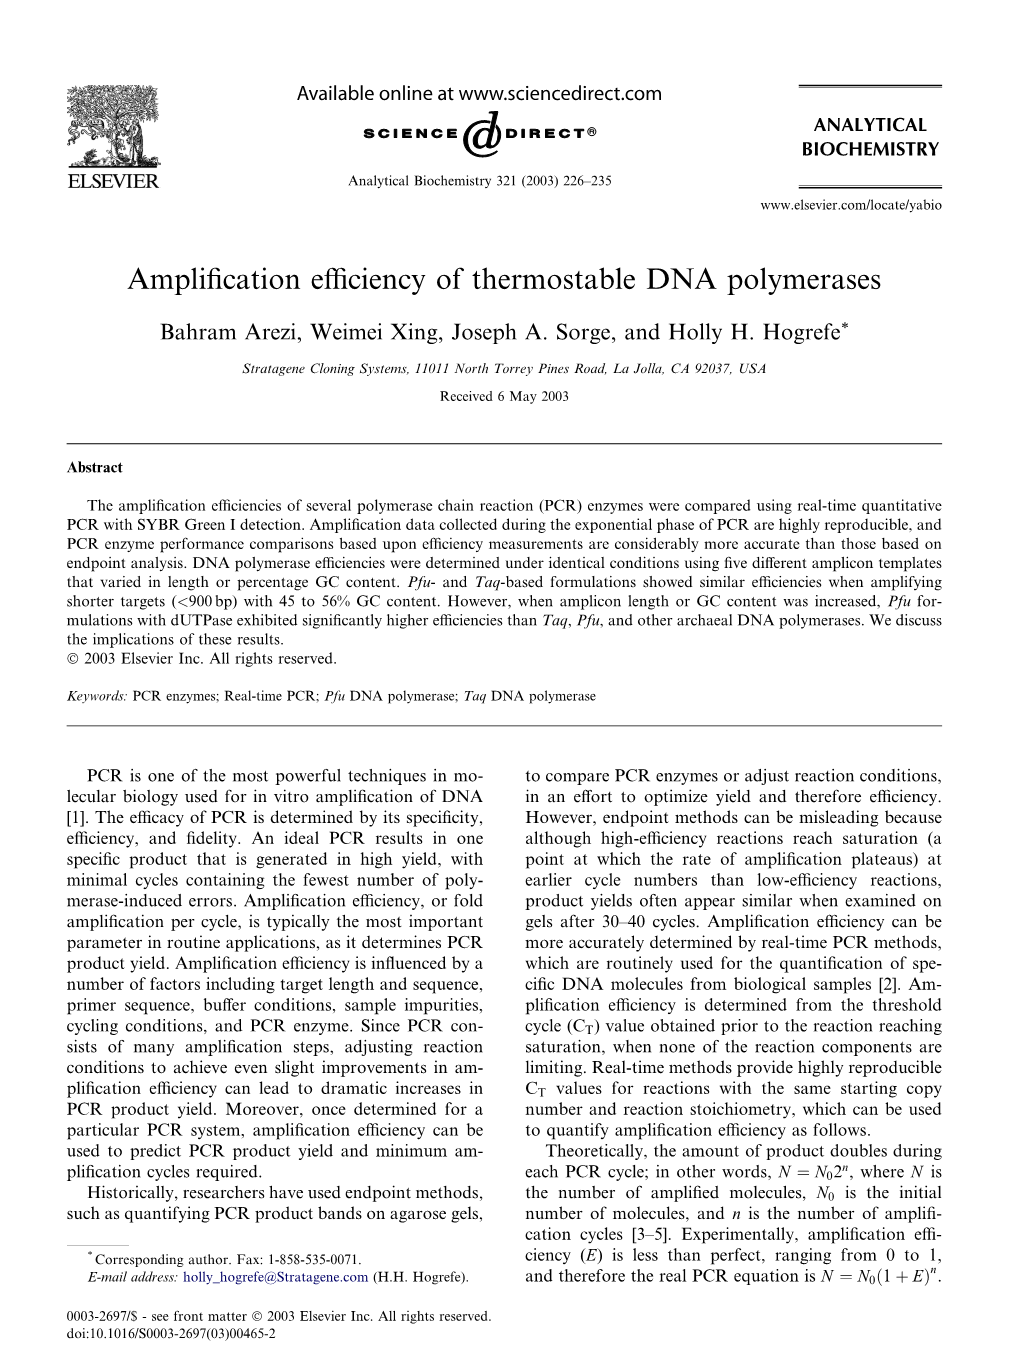 Amplification Efficiency of Thermostable DNA Polymerases